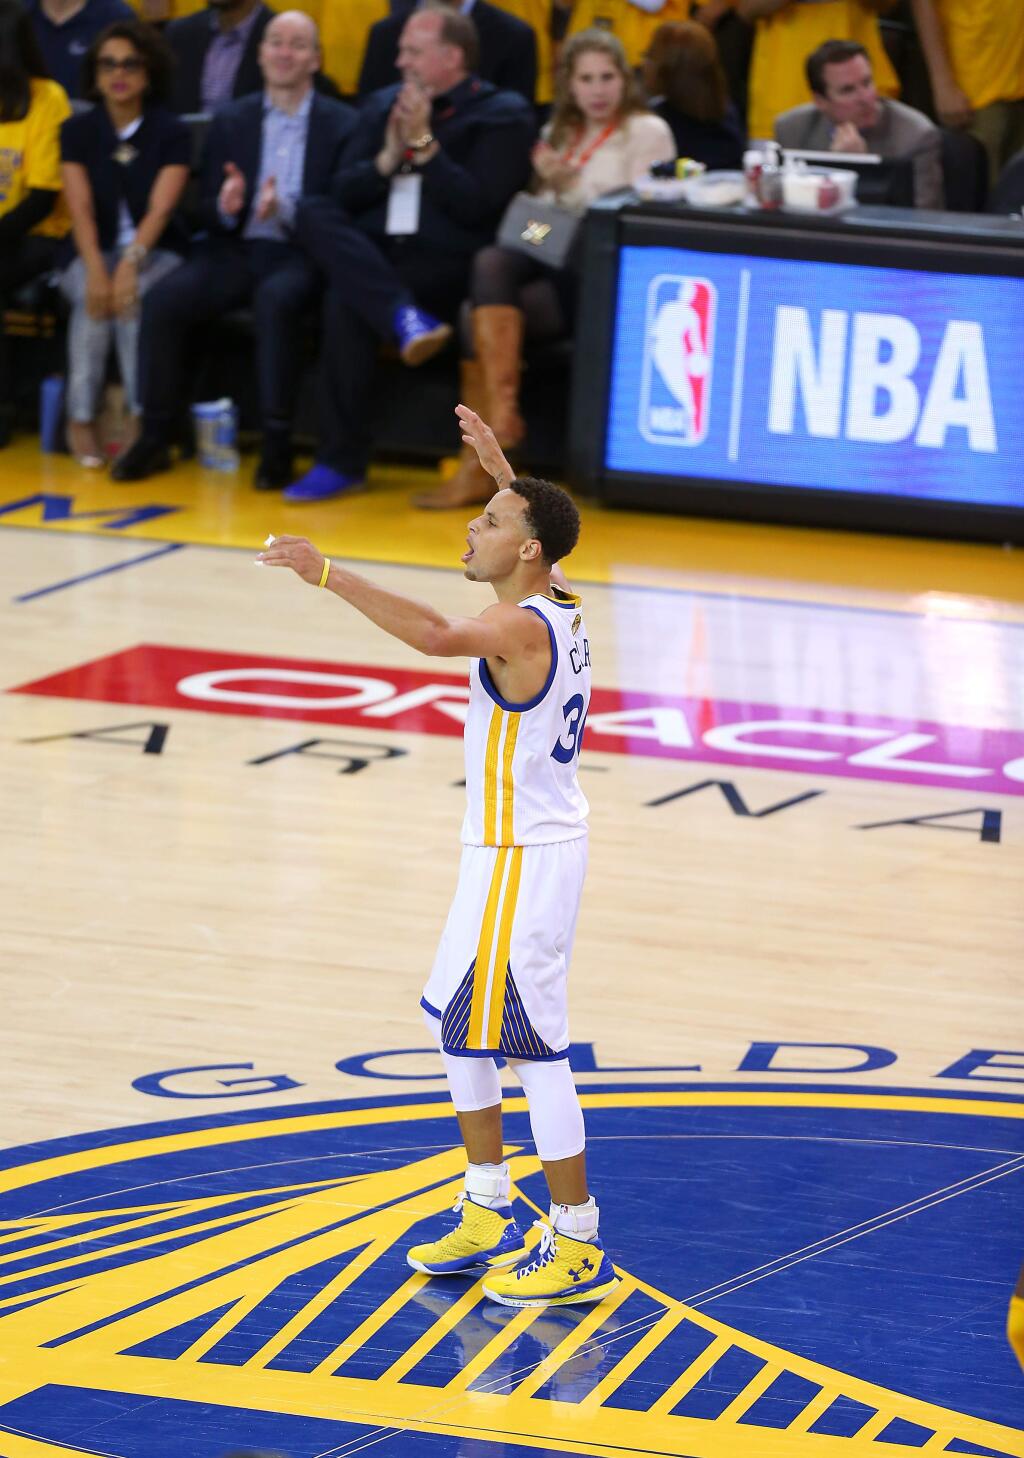 Golden State Warriors guard Stephen Curry gets the crowd going during Game 1 of the NBA Finals at Oracle Arena, in Oakland on Thursday, June 4, 2015. The Warriors defeated the Cavaliers 108-100 in overtime.(Christopher Chung/ The Press Democrat)